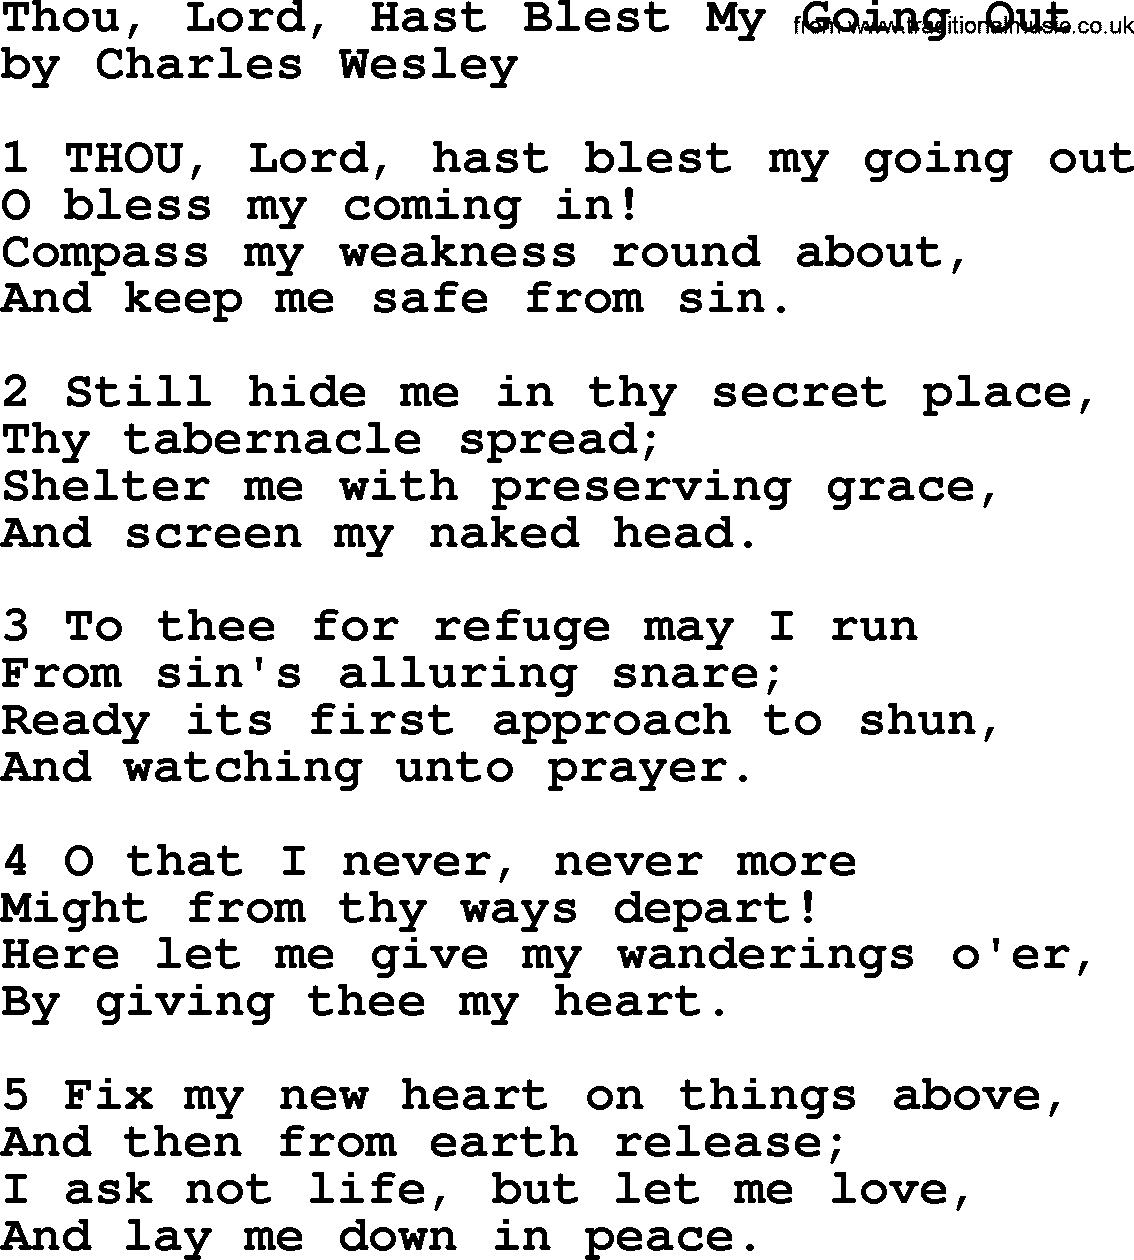 Charles Wesley hymn: Thou, Lord, Hast Blest My Going Out, lyrics